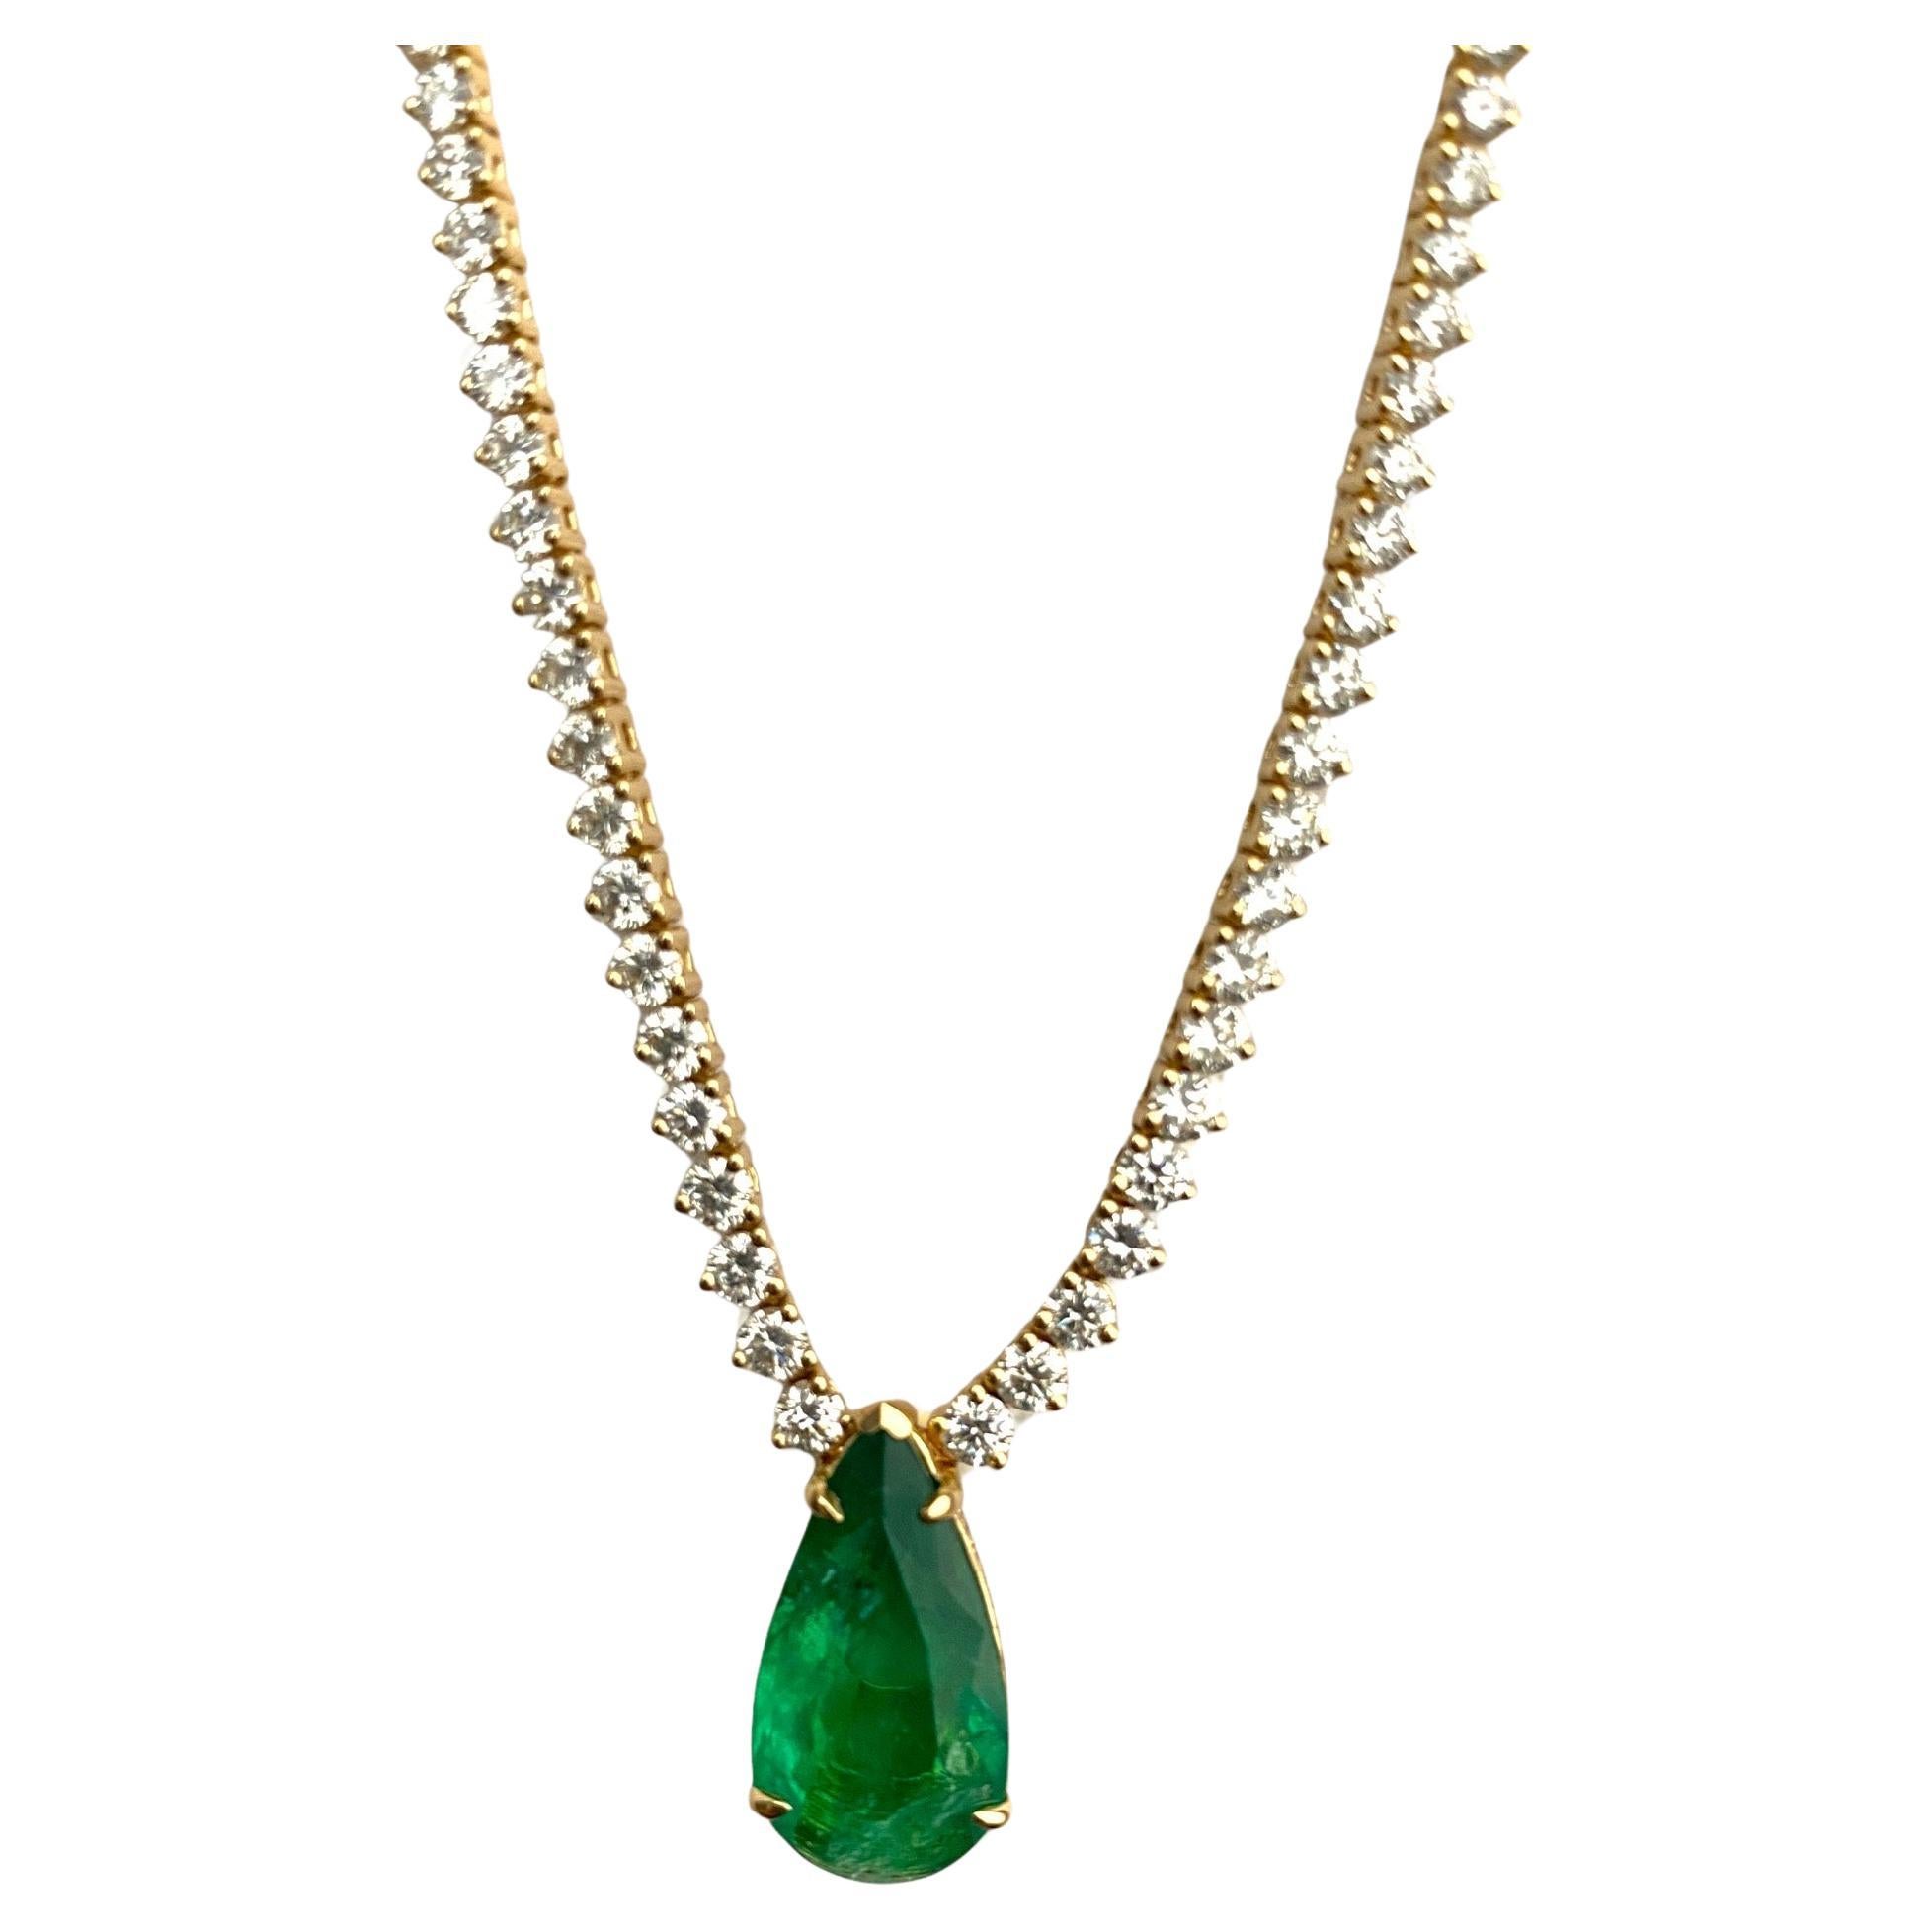 Statement 7.5 ct Emerald and Graduated Diamond Necklace For Sale